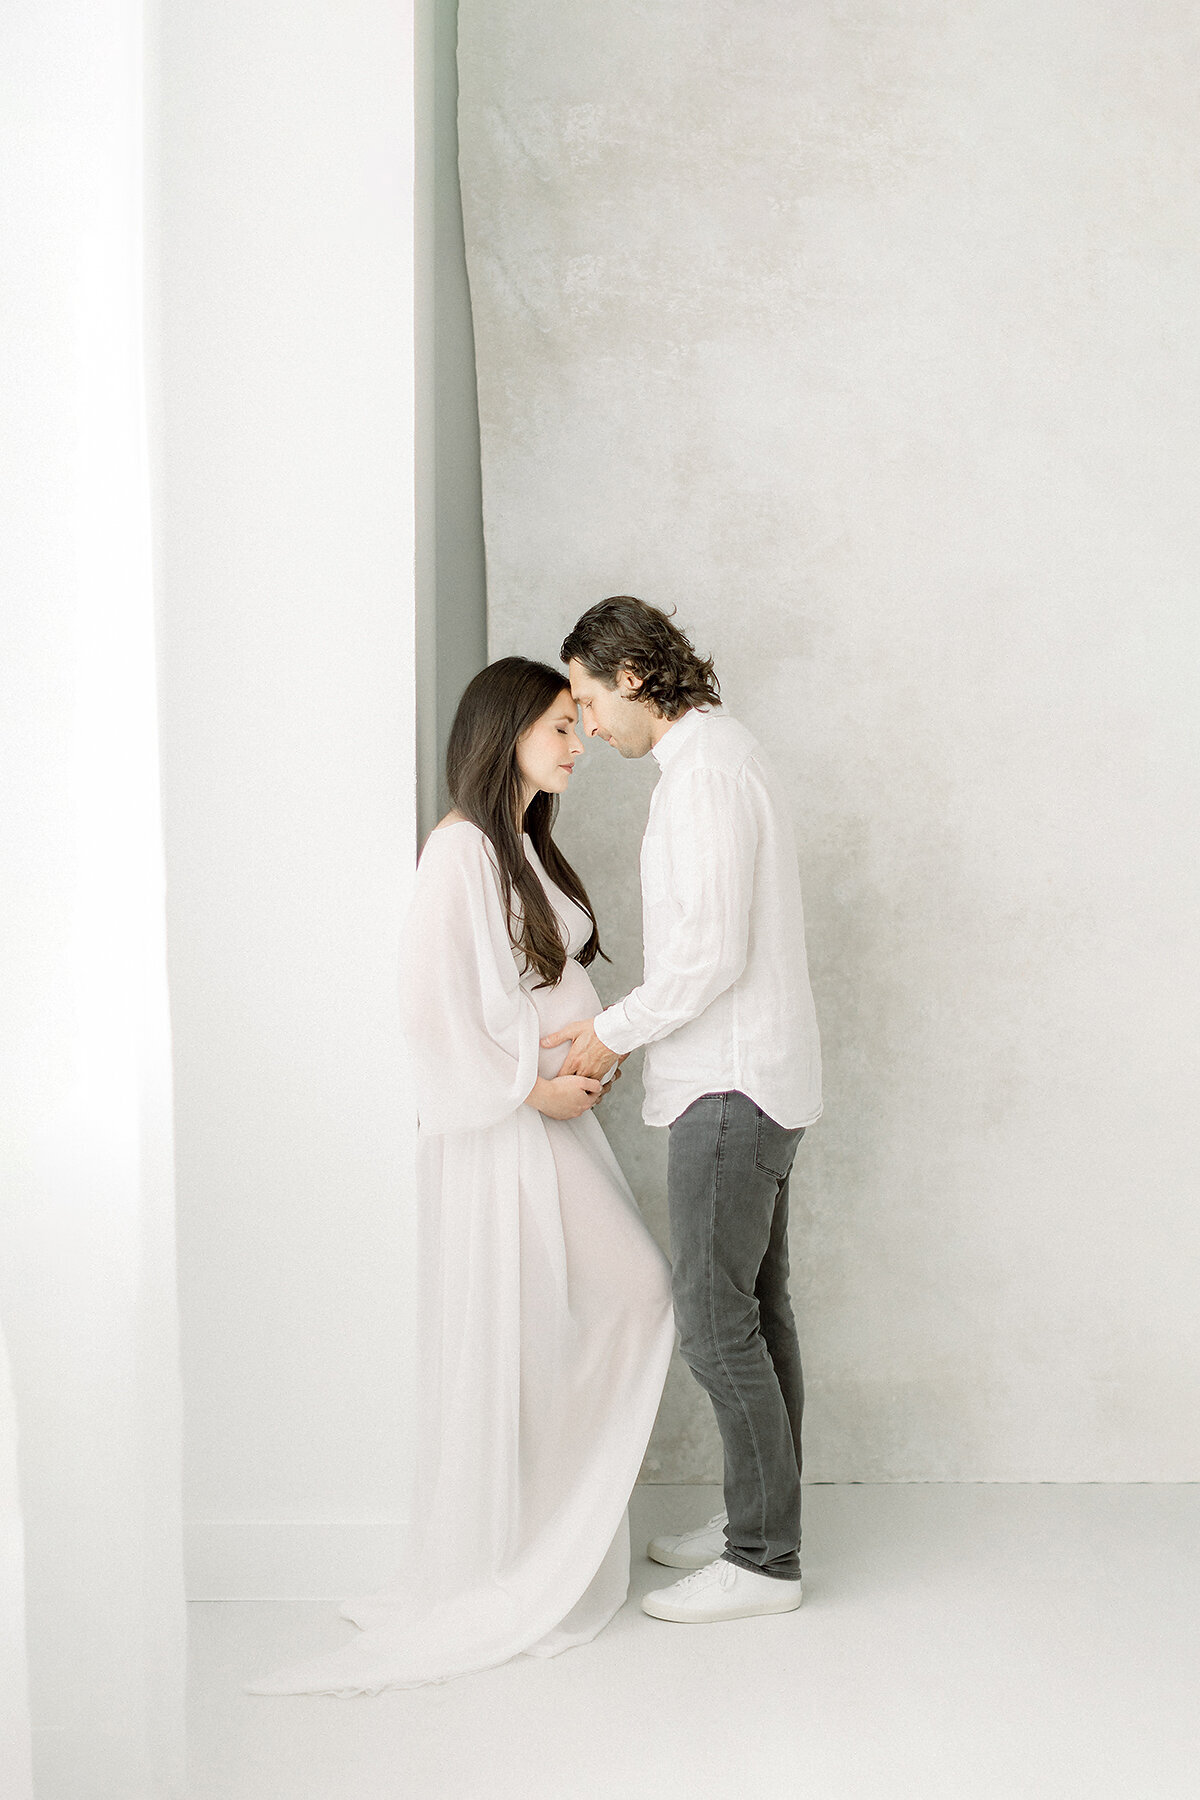 Photo of an expecting Dallas mom leaning on a wall with her spouse standing in front of her as he holder her belly for their maternity session at a Dallas photography studio.